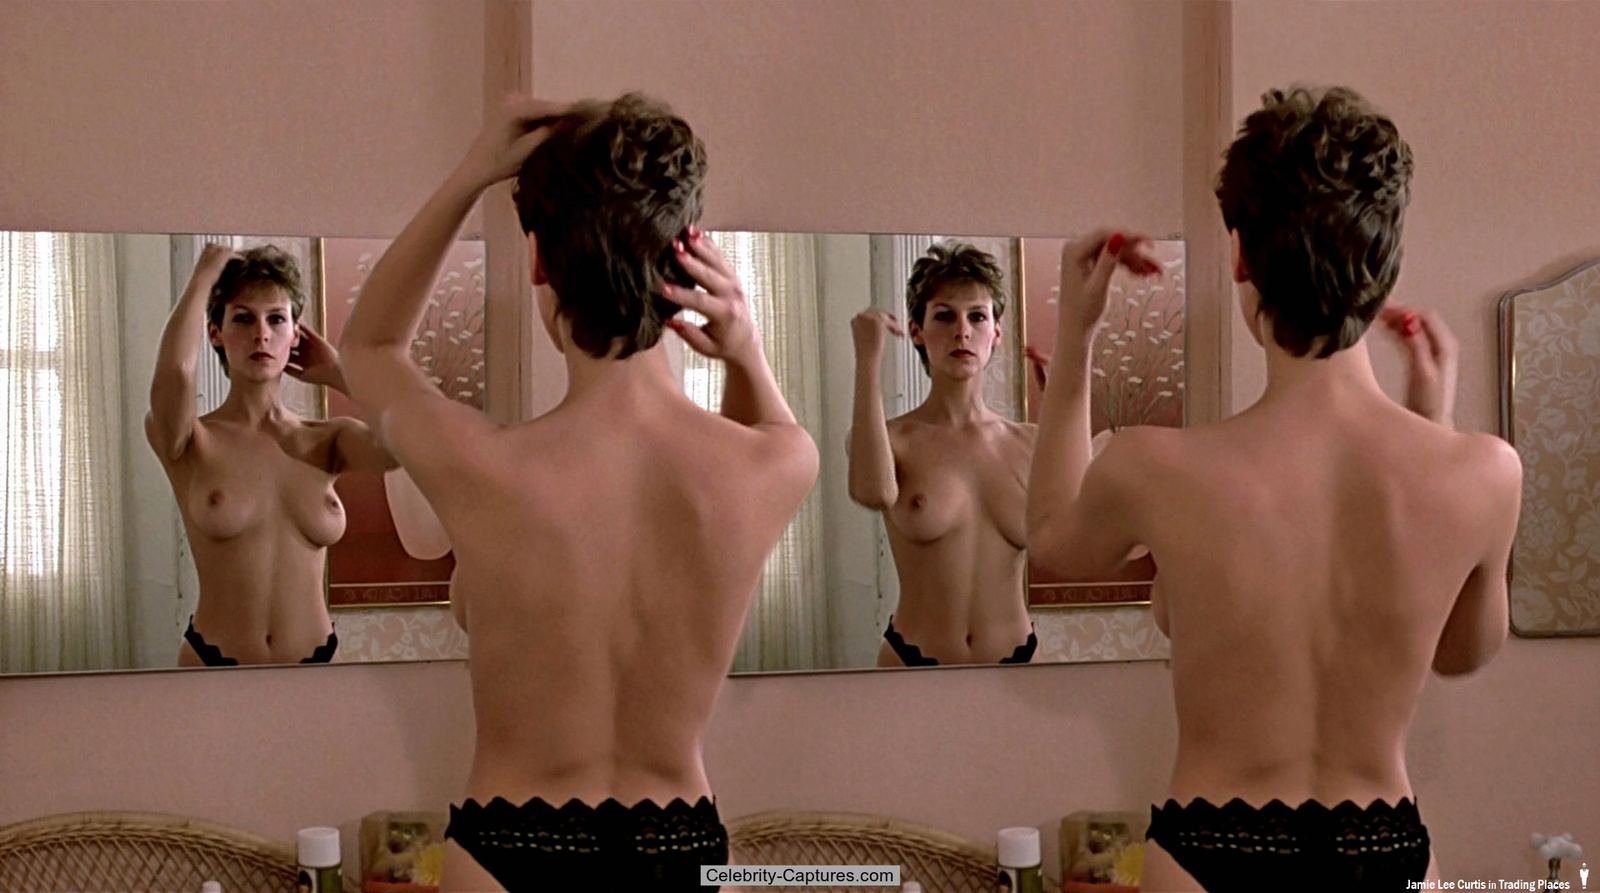 Best of Jamie lee curtis trading places nude